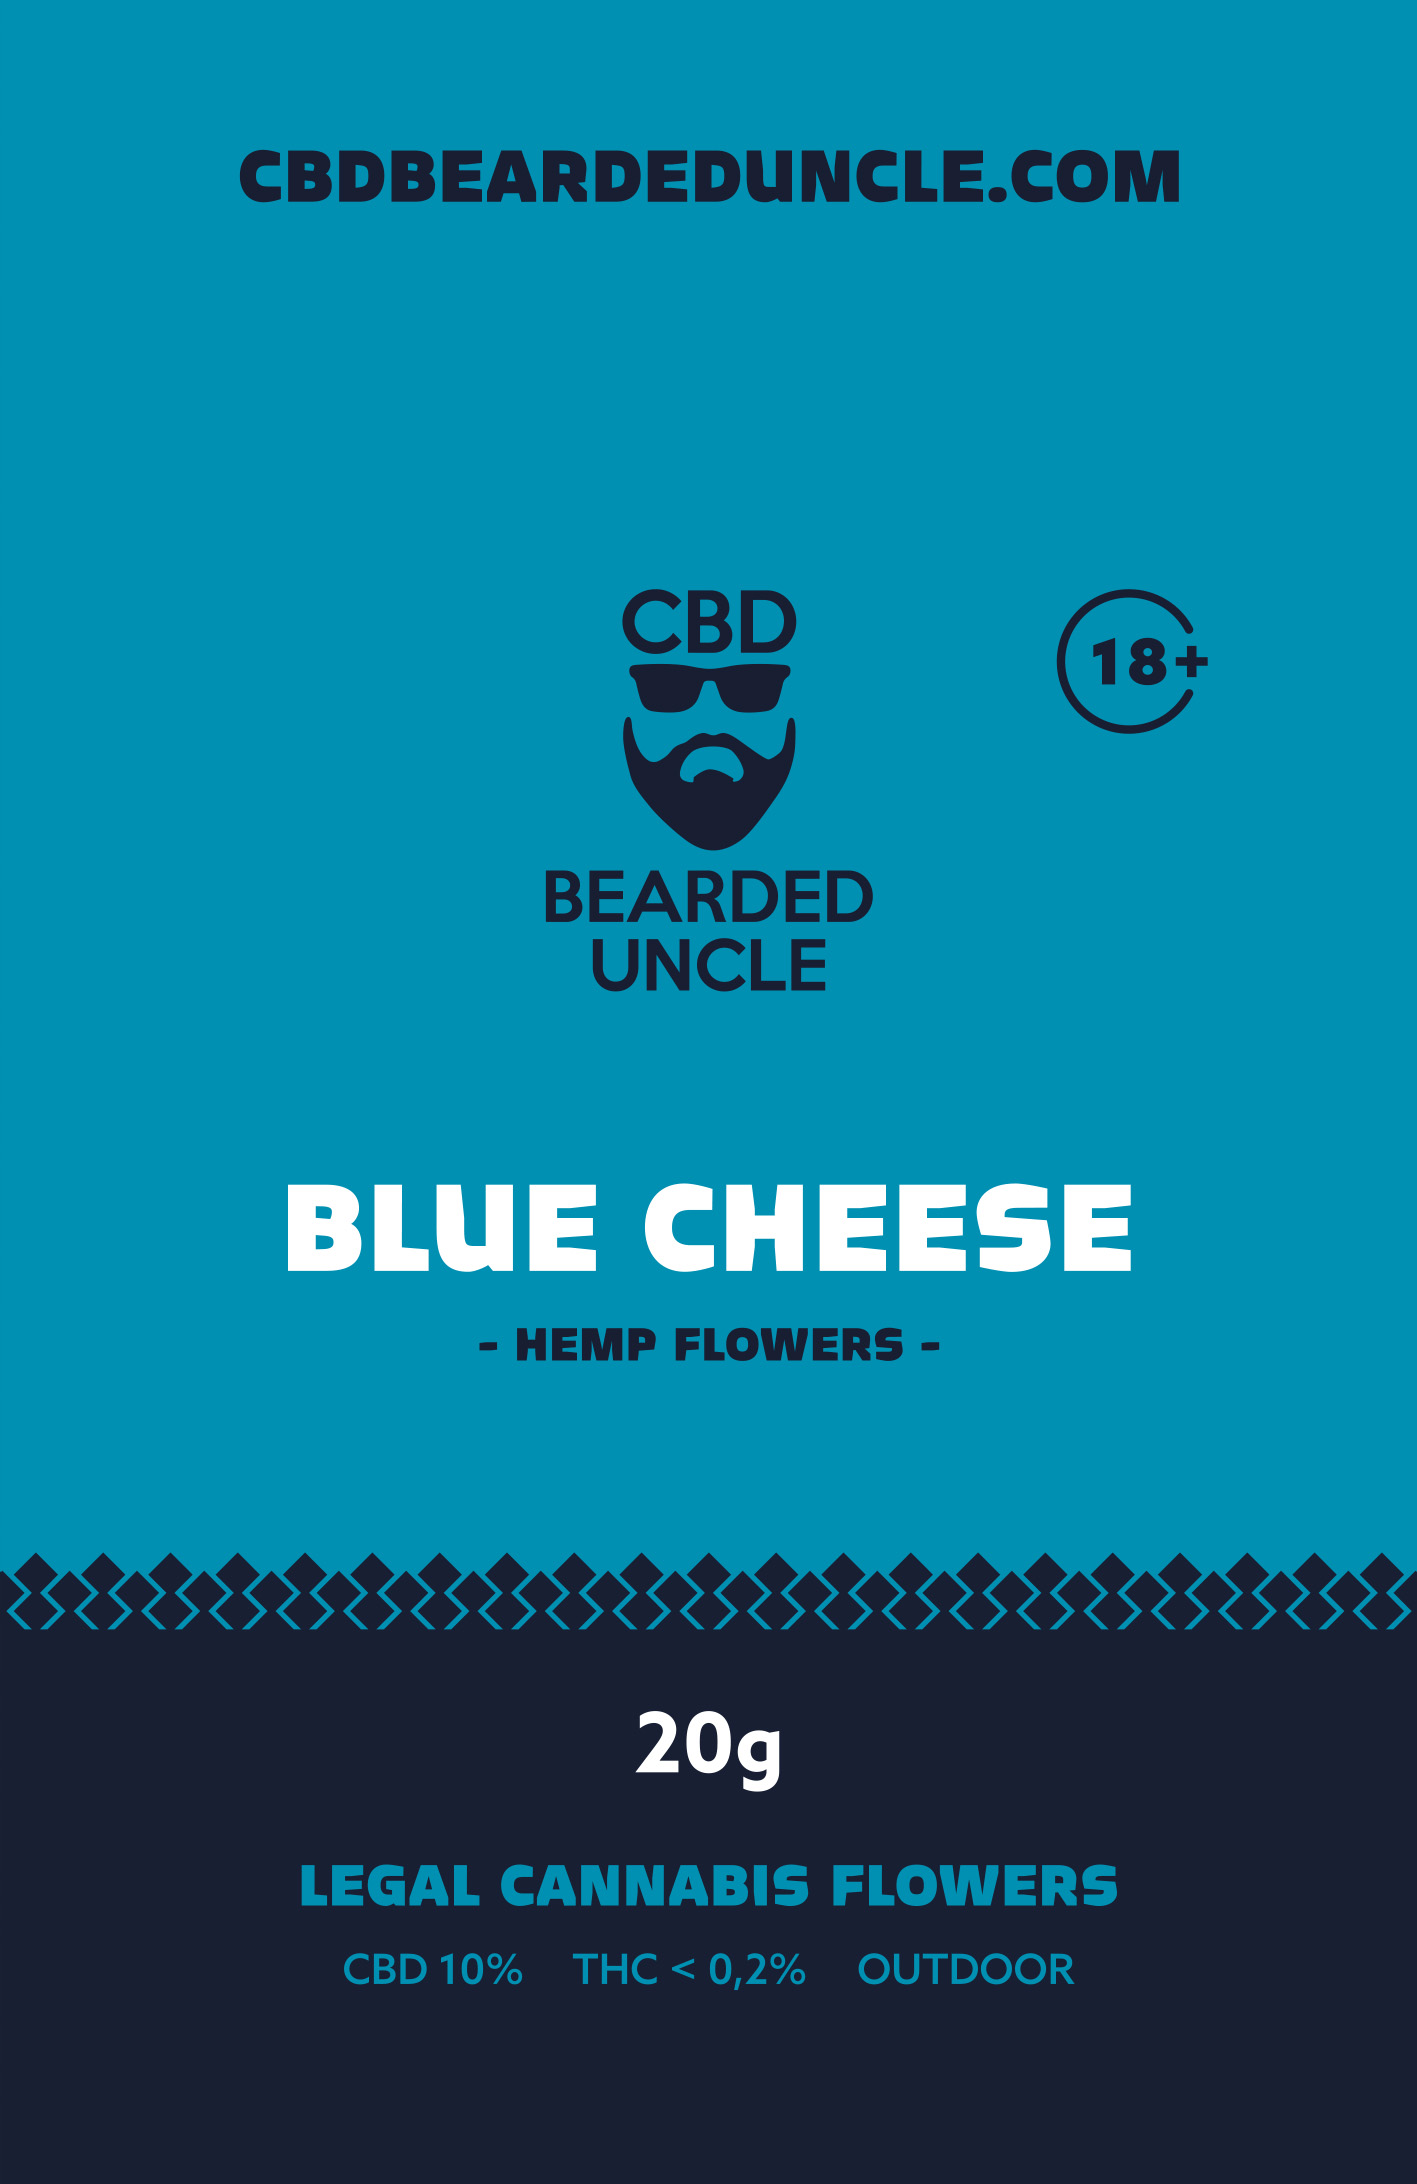 BEARDED UNCLE BLUE CHEESE OUTDOOR CBD 10% a THC 0,2% 20g 